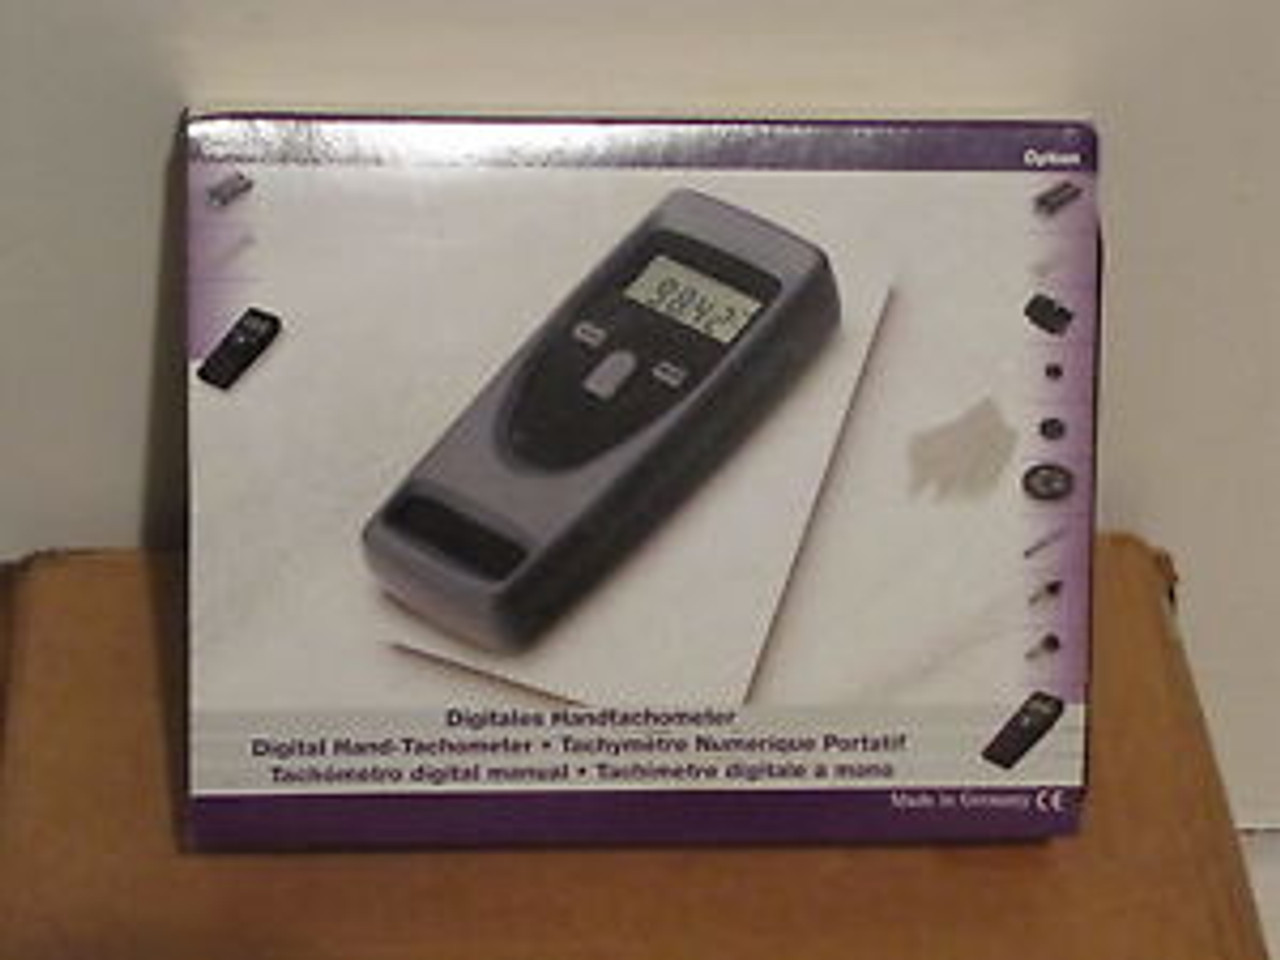 Checkline Combination Contact and Non-Contact Digital Tachometer -  CDT-2000HD